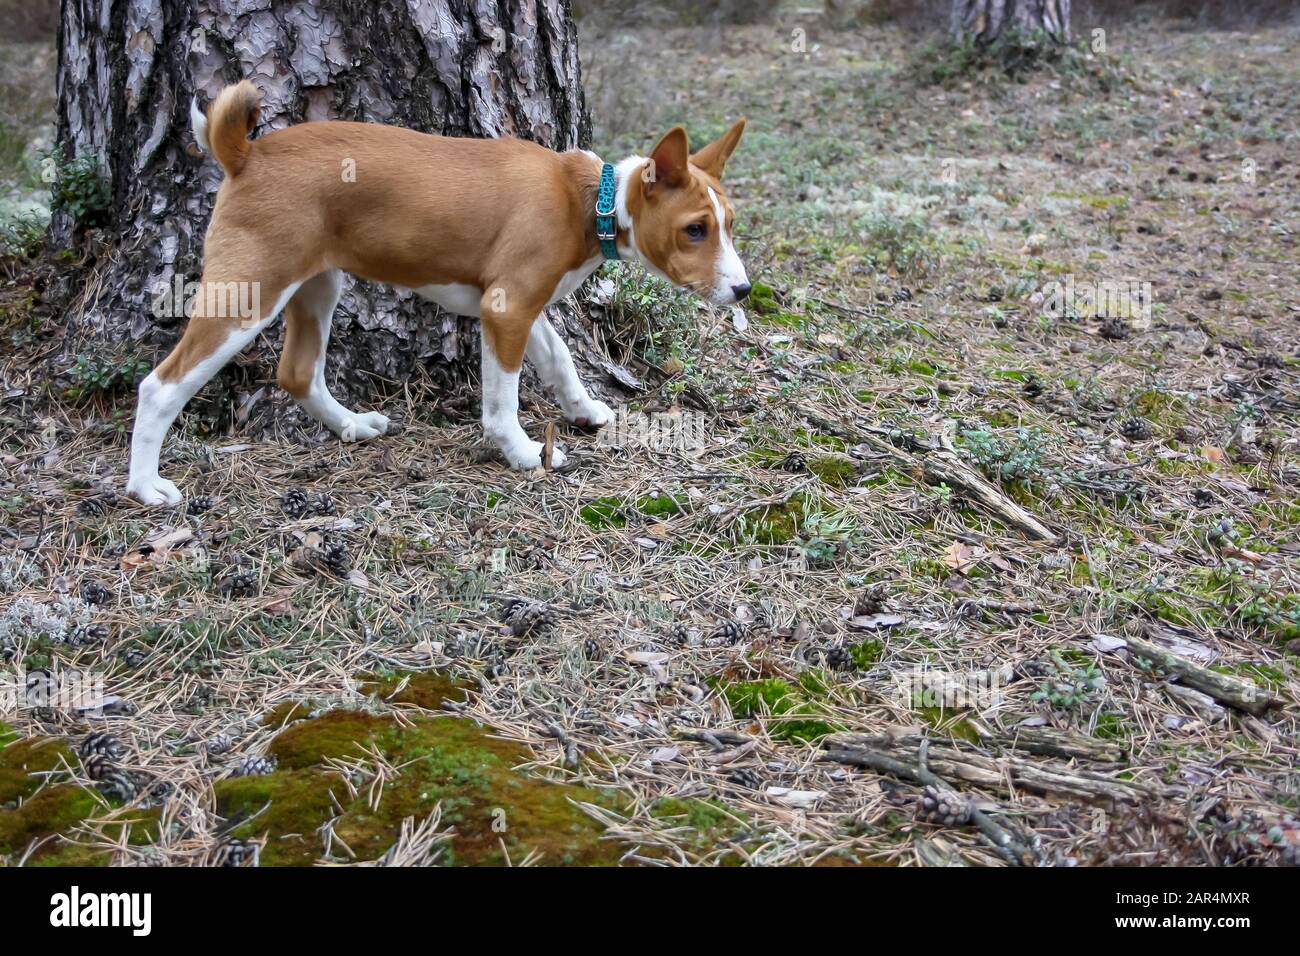 A new basenji dog runs through the forest moss in the spring Stock Photo